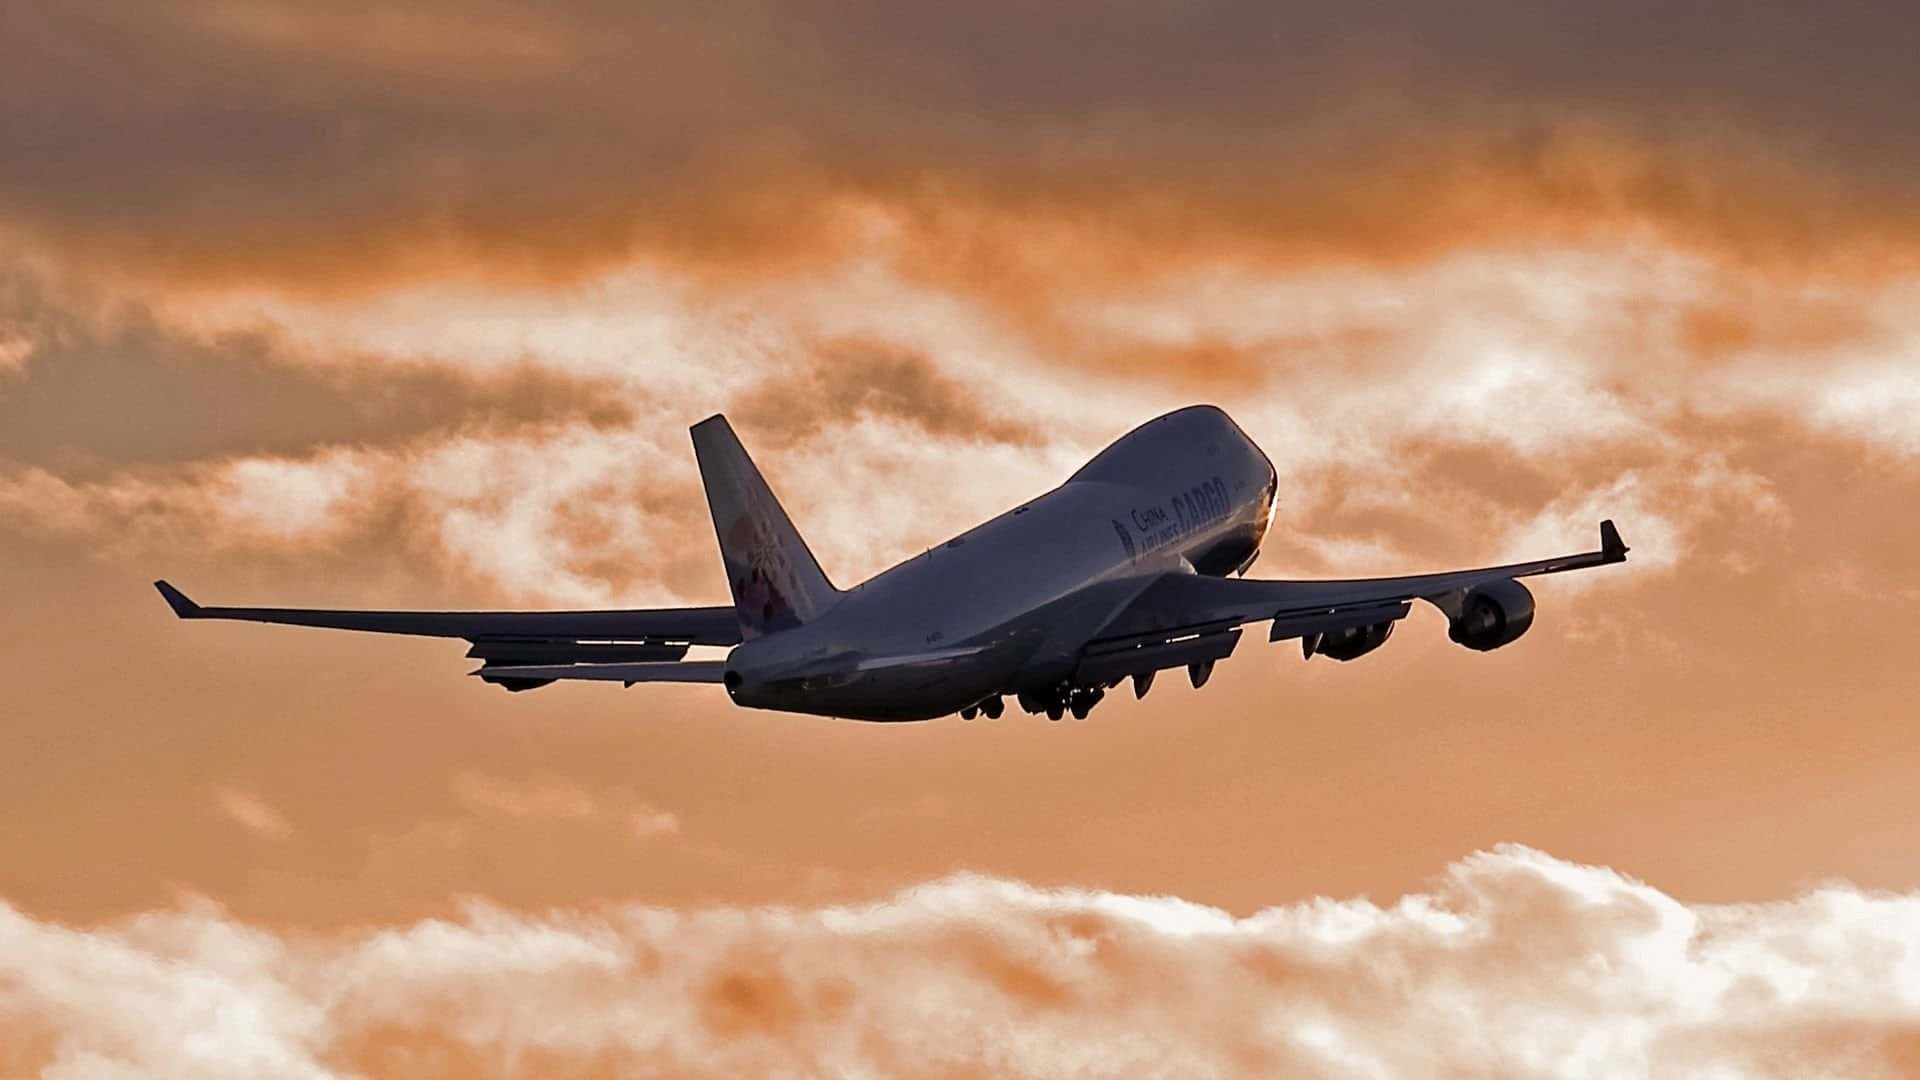 “climb Aboard A Classic: A Boeing 747 Airliner In Flight” Background